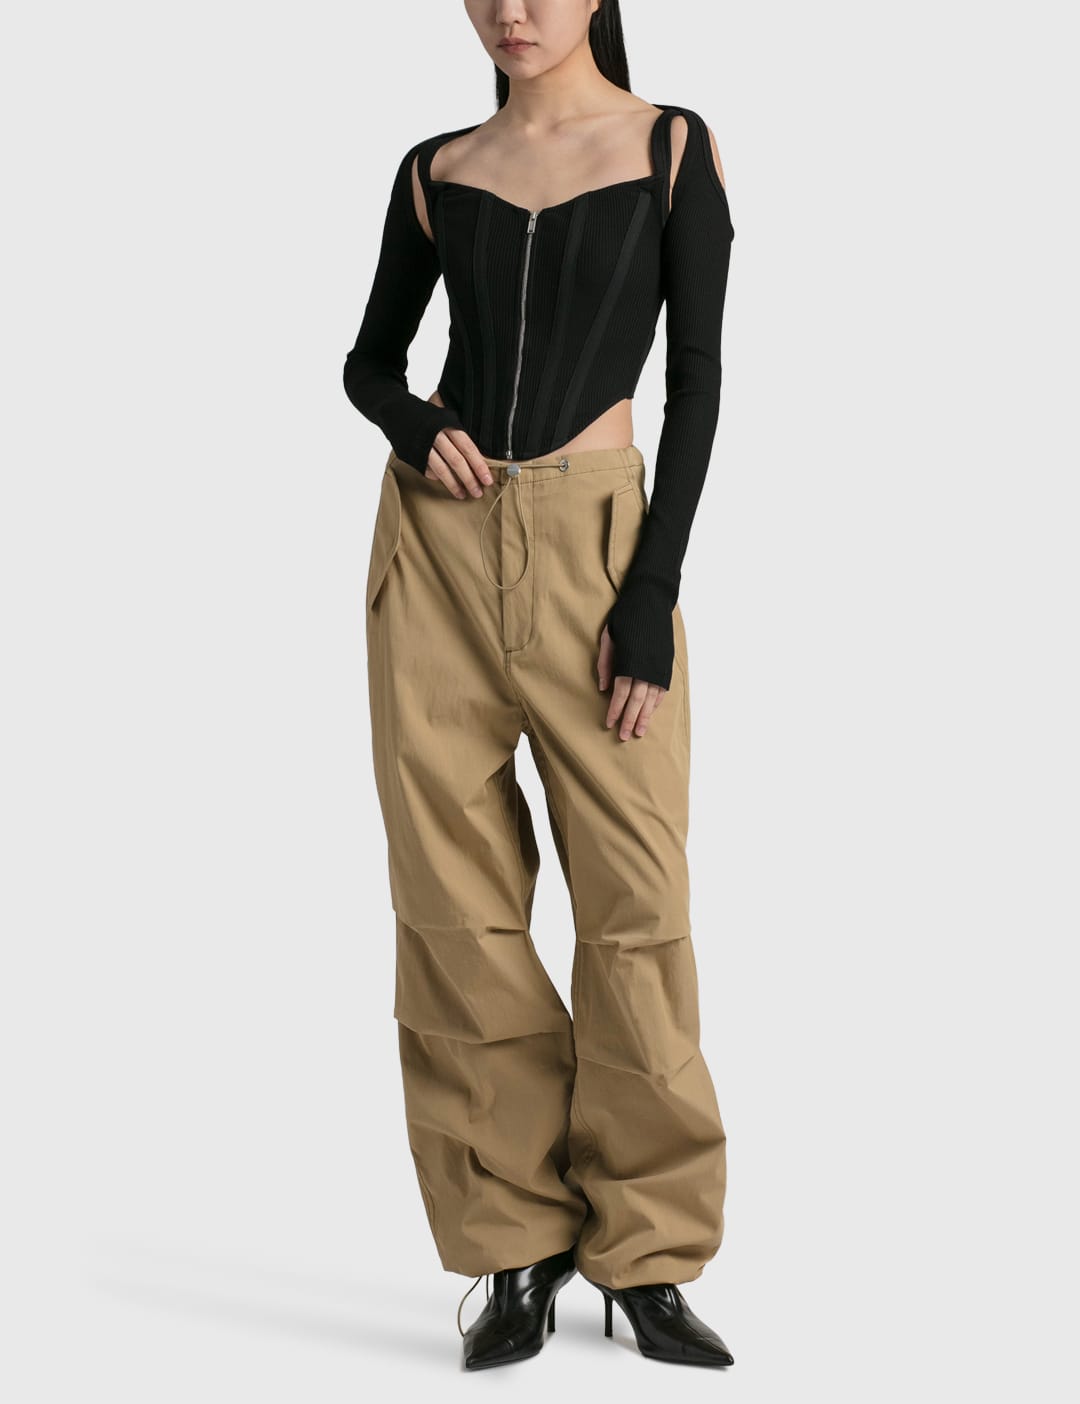 Dion Lee   Toggle Parachute Pants   HBX   Globally Curated Fashion